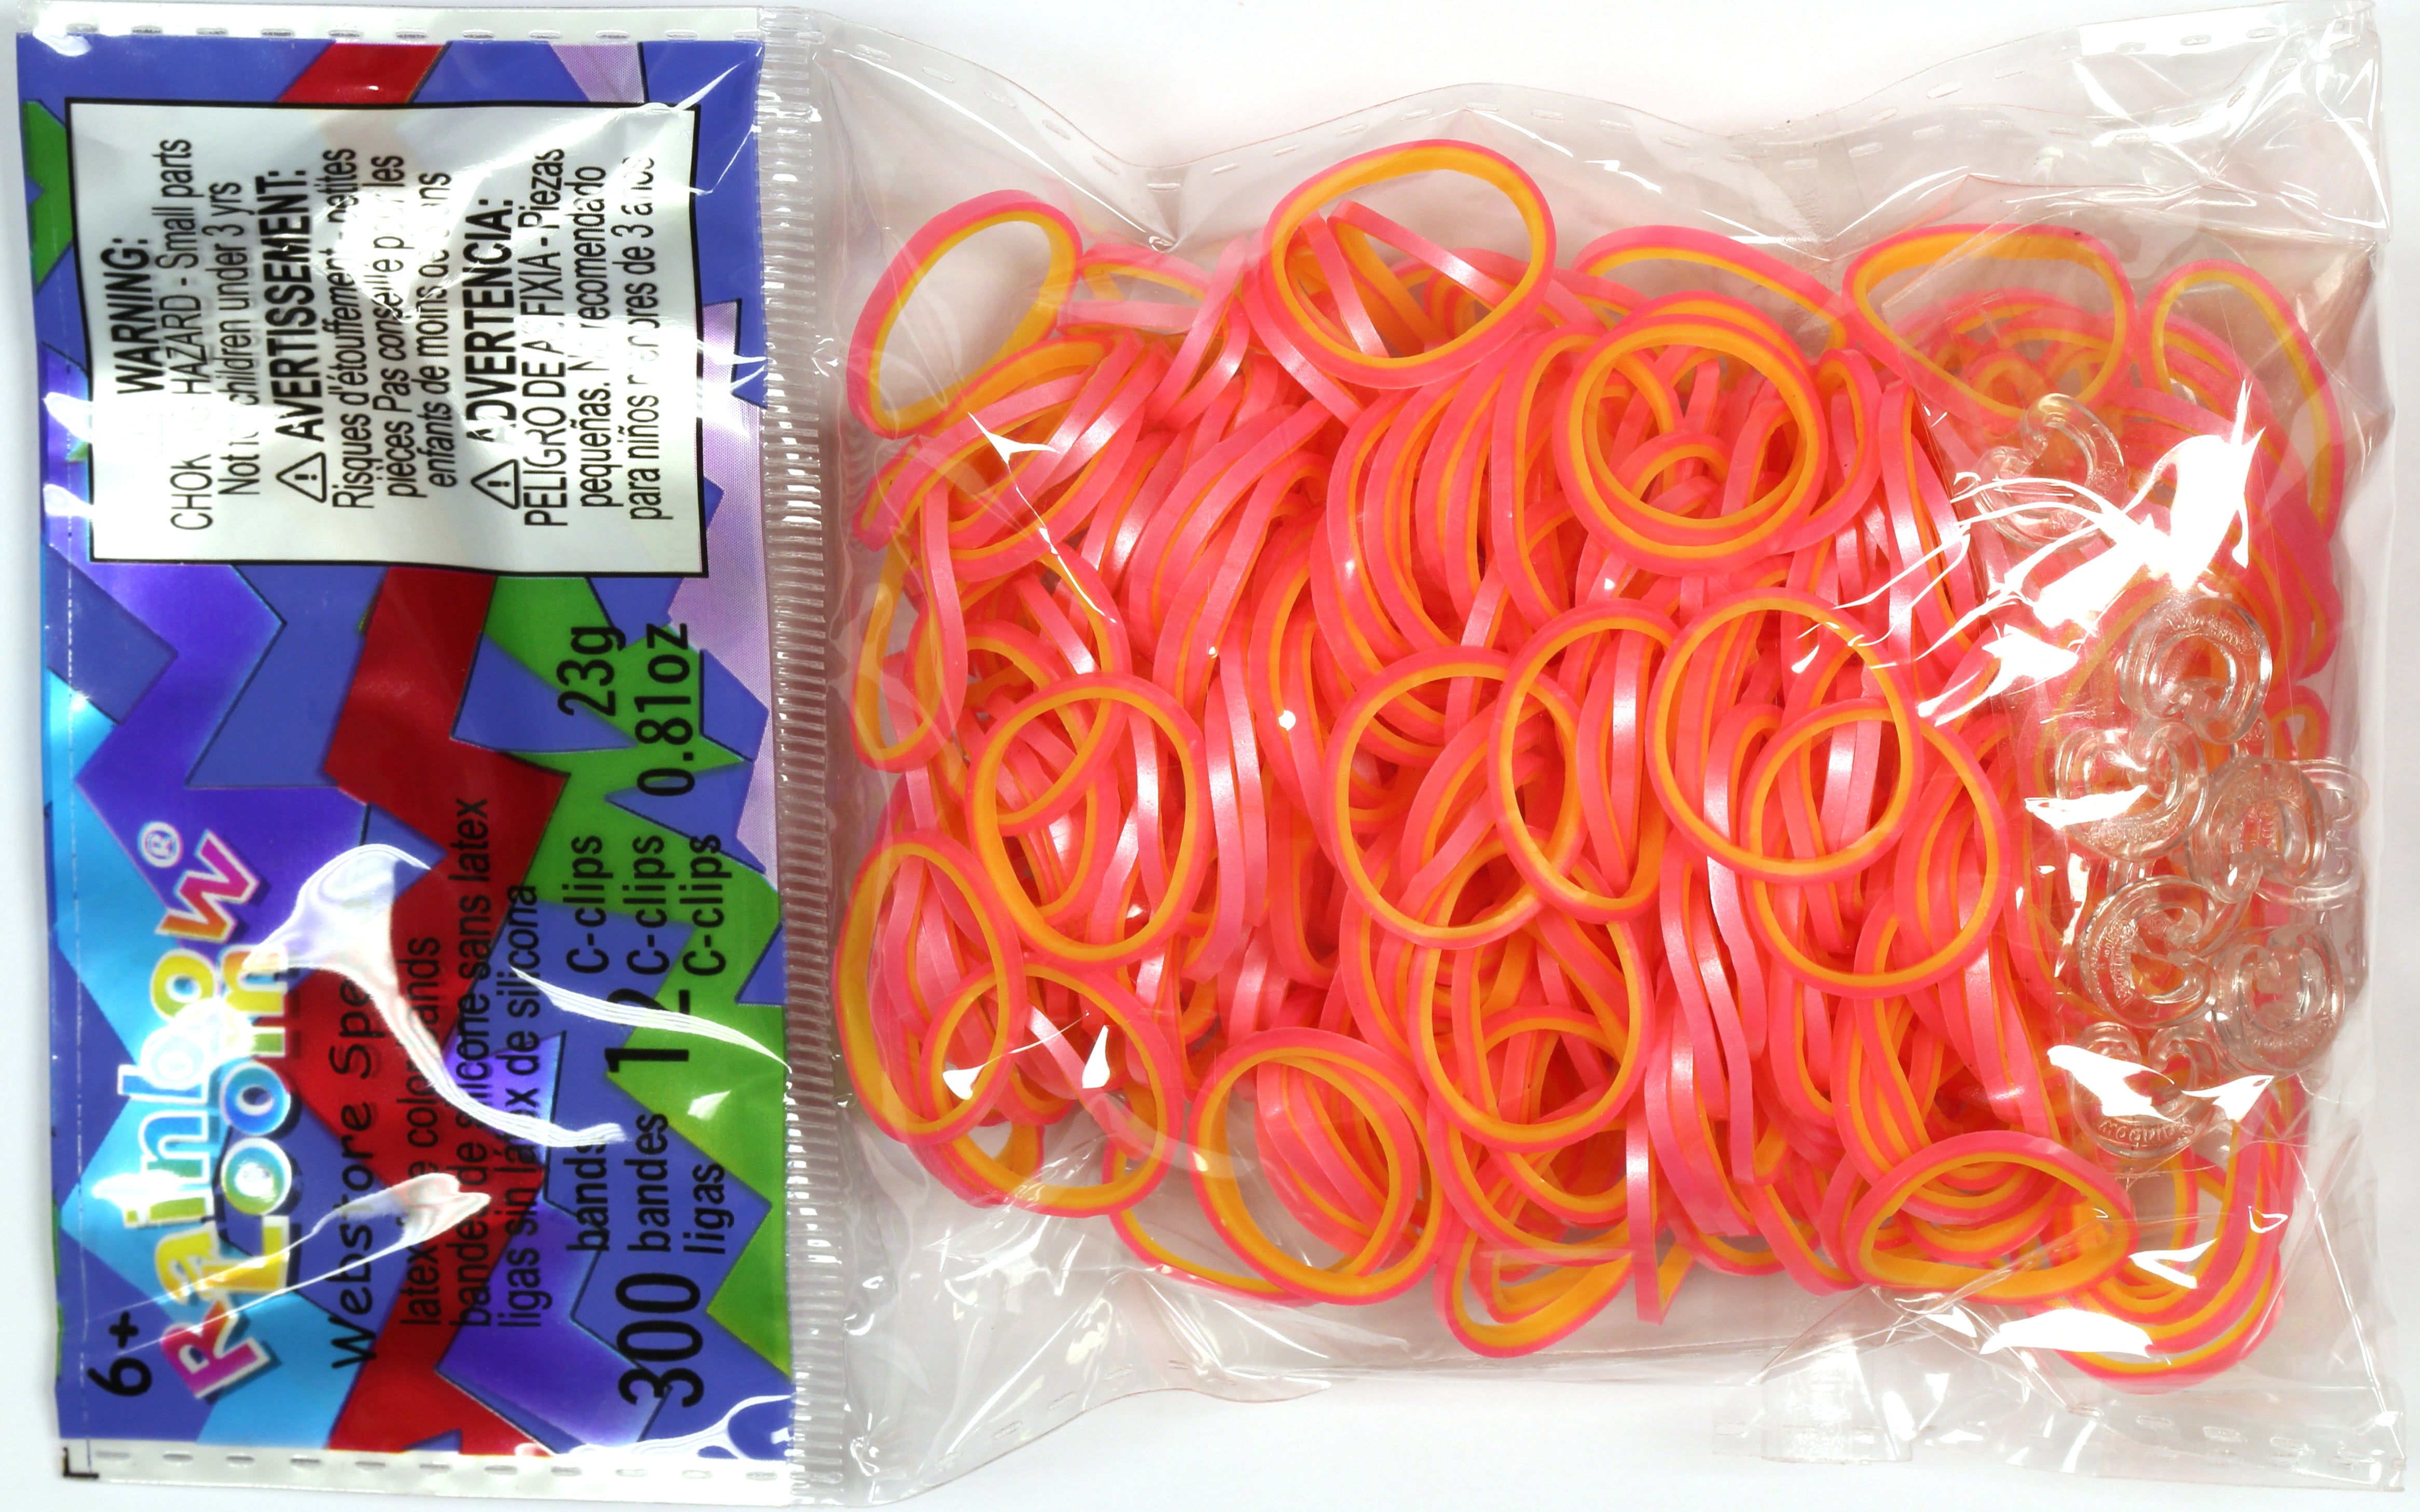 Rainbow Loom Orange Authentic High Quality Rubber Bands, the Original  Rubber Bands for Everything Rainbow Loom, Children Ages 7 and Up.